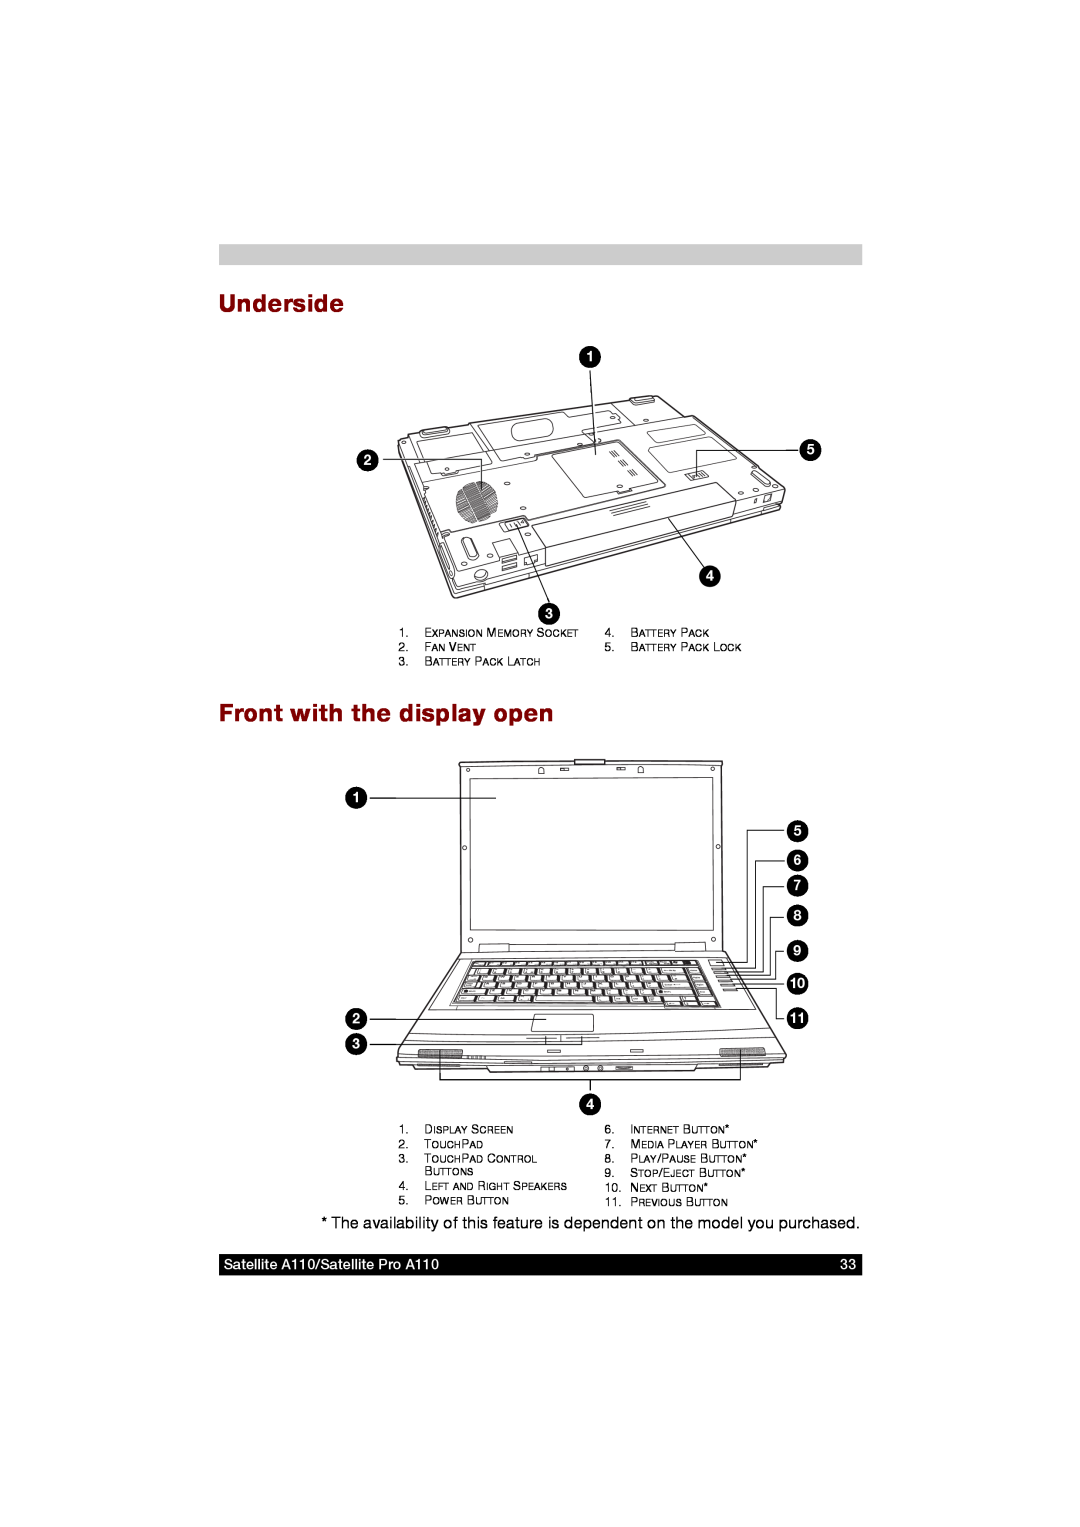 Toshiba user manual Underside, Front with the display open, Satellite A110/Satellite Pro A110 